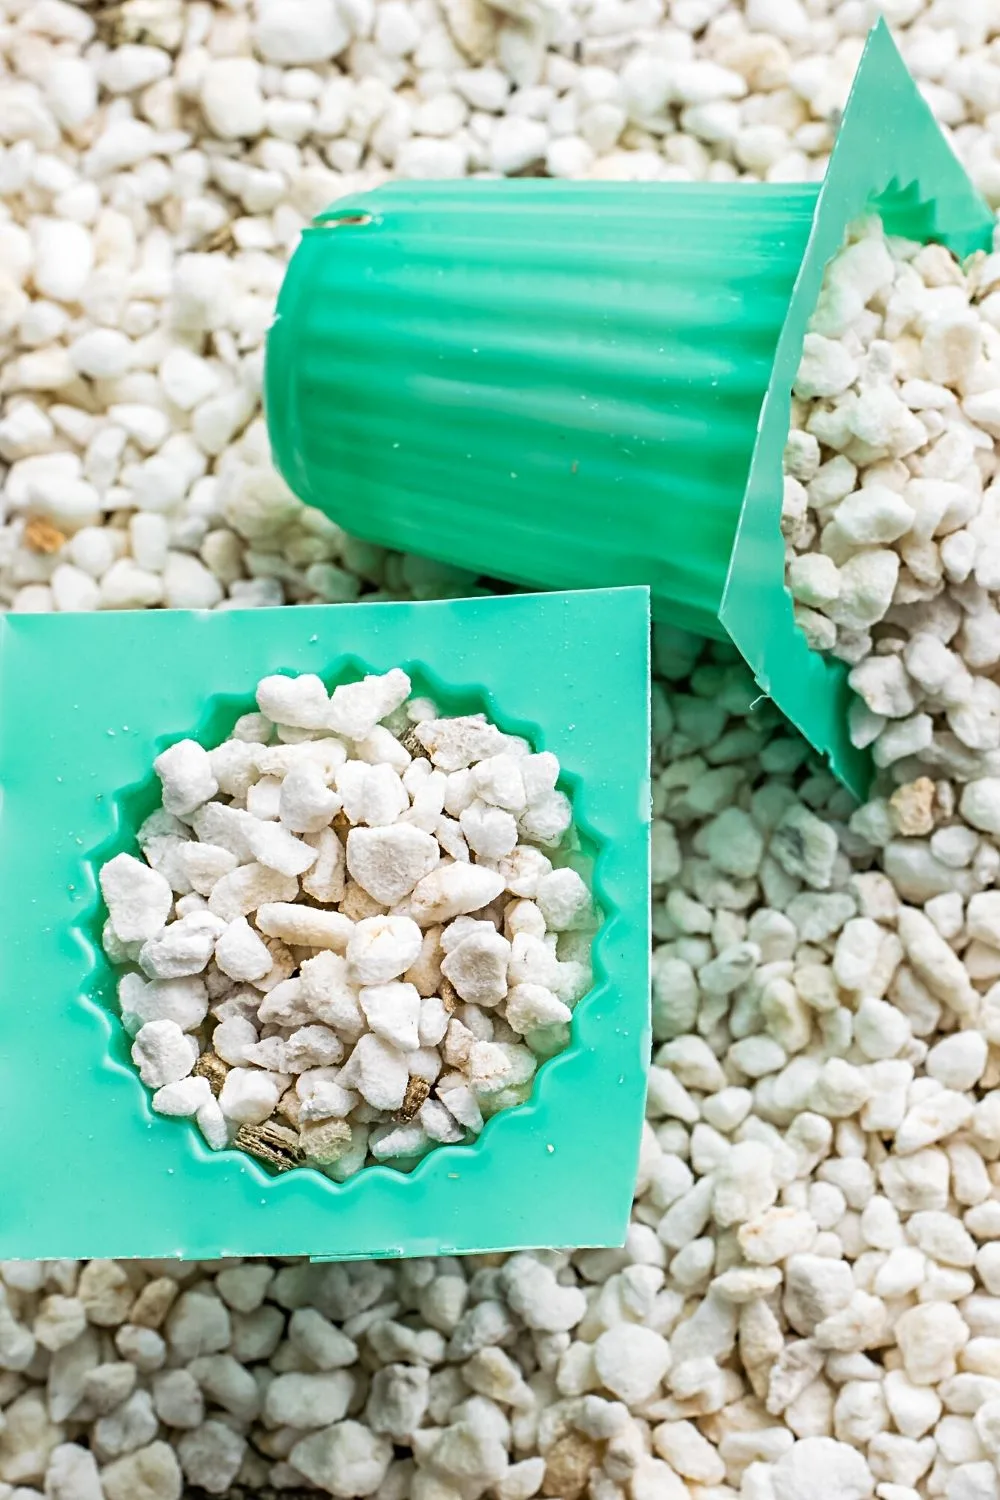 If you'll use a store-bought soil mix for your ZZ plant, make sure it contains perlite